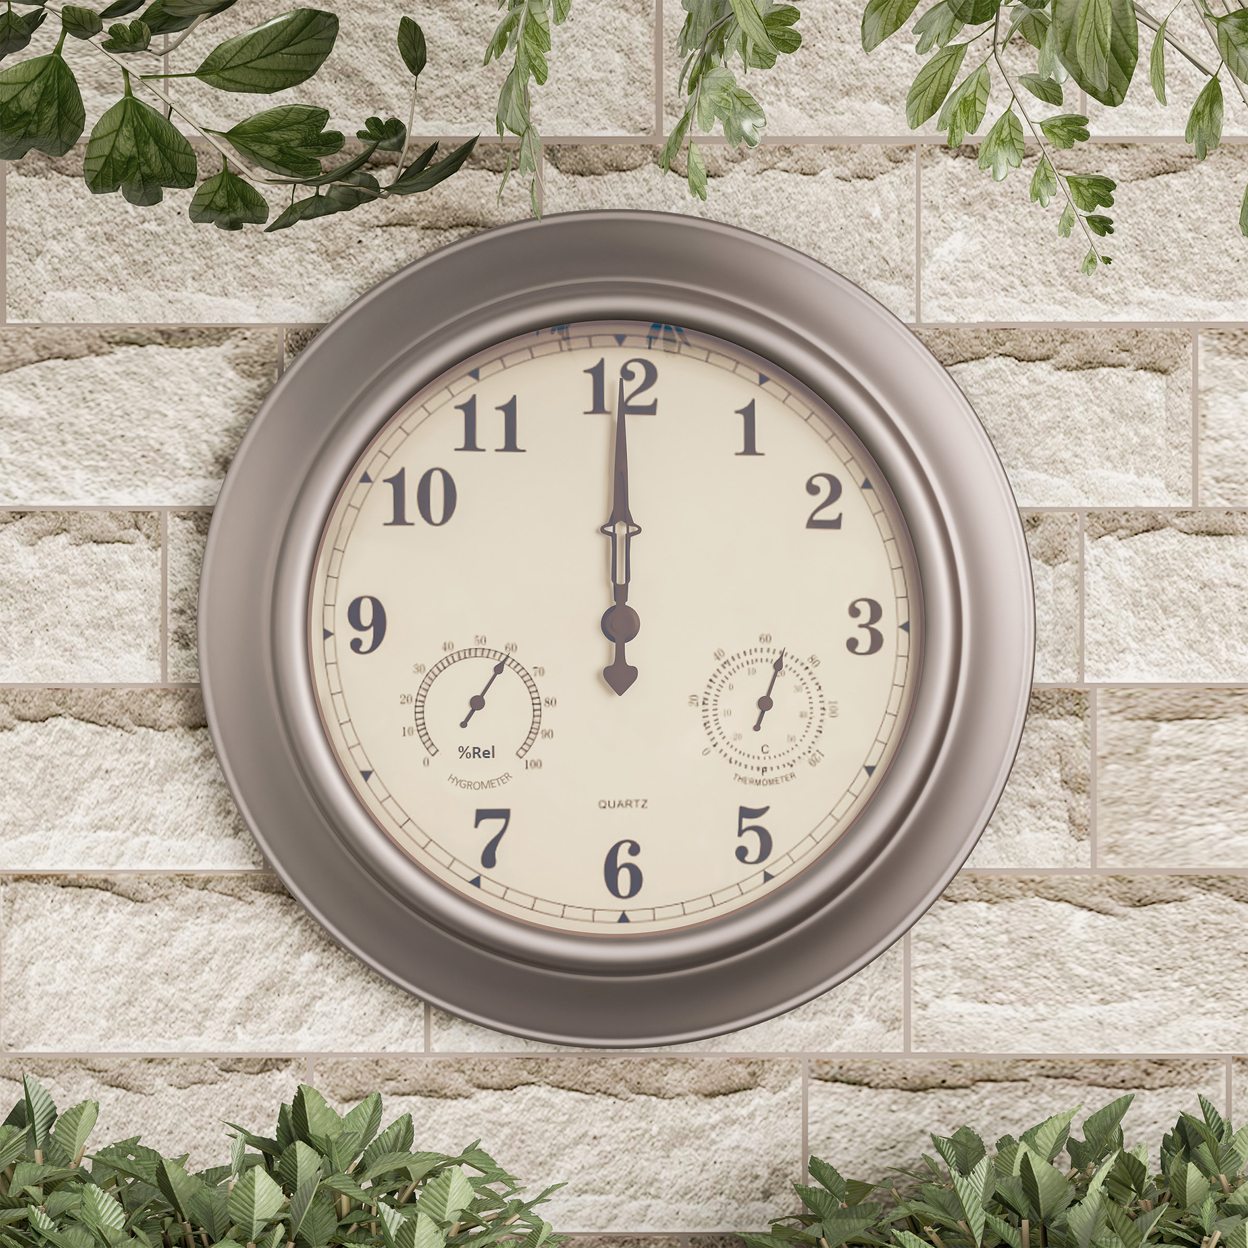 Patio Wall Clock Thermometer-Indoor Outdoor Decorative 18 Inch Silver